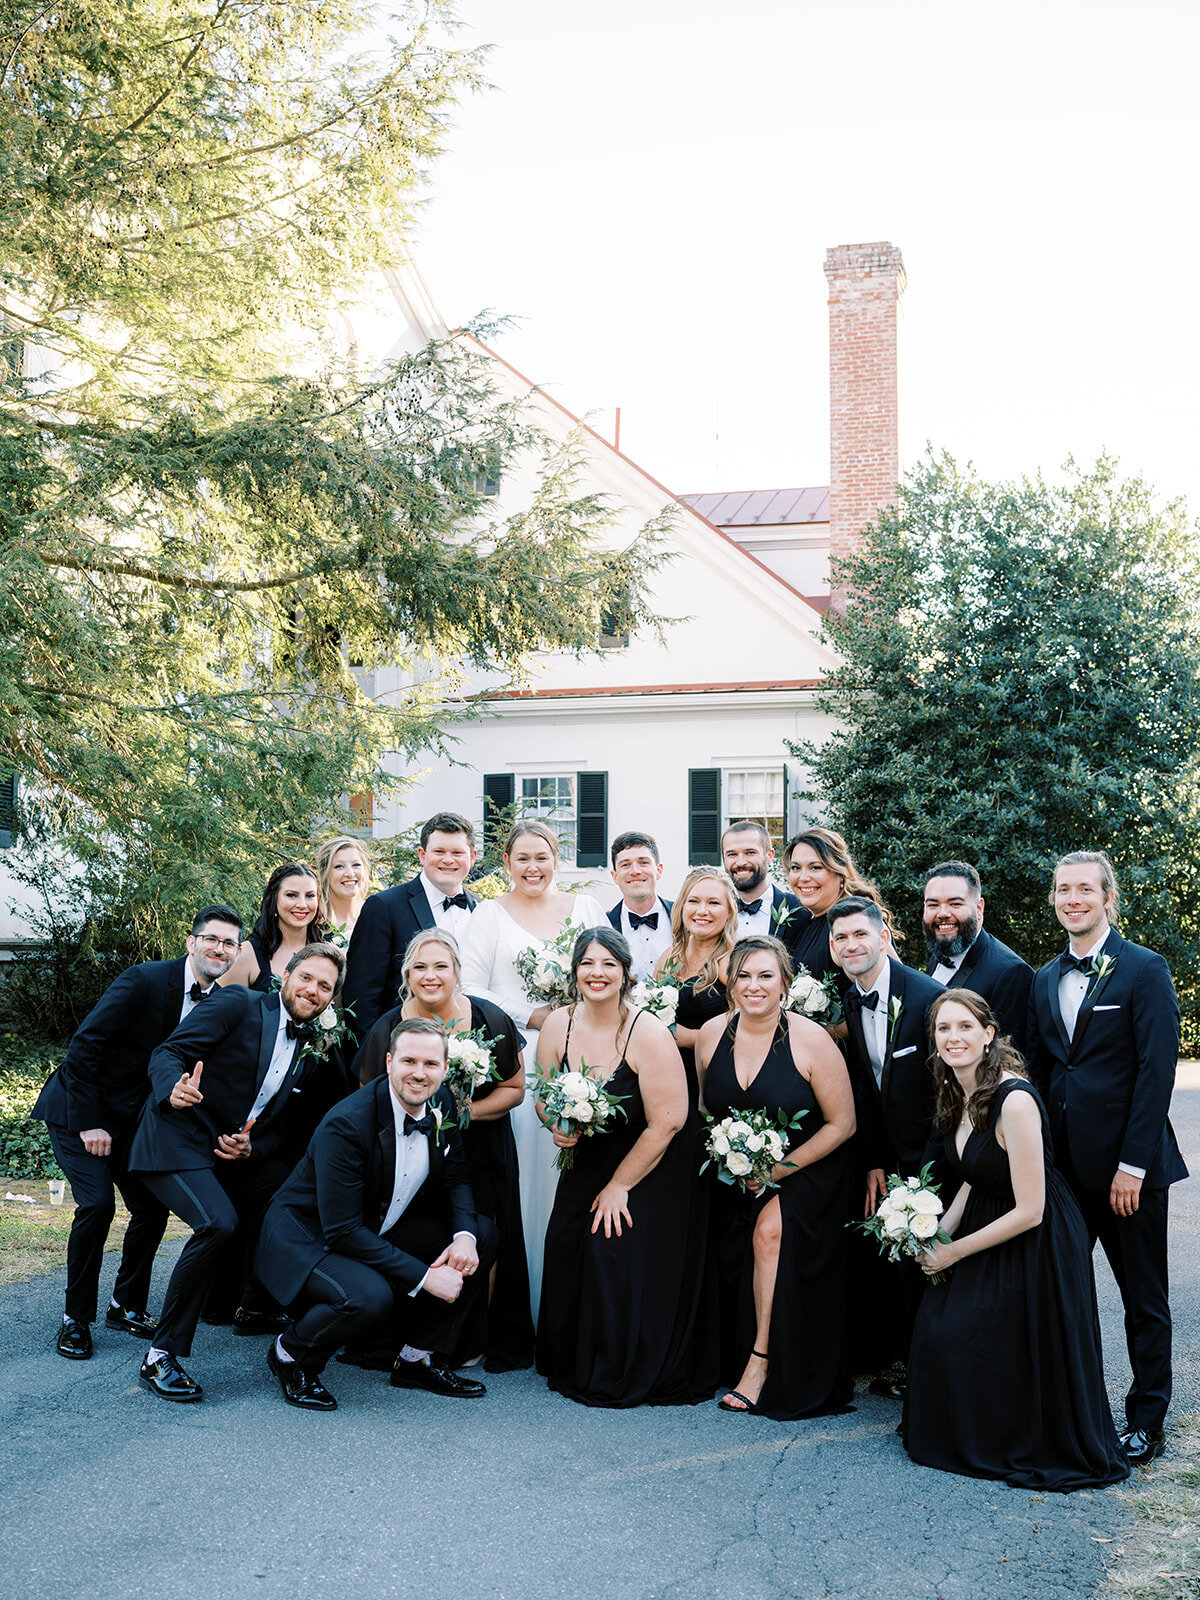 Wedding party wearing black and classic tuxedos